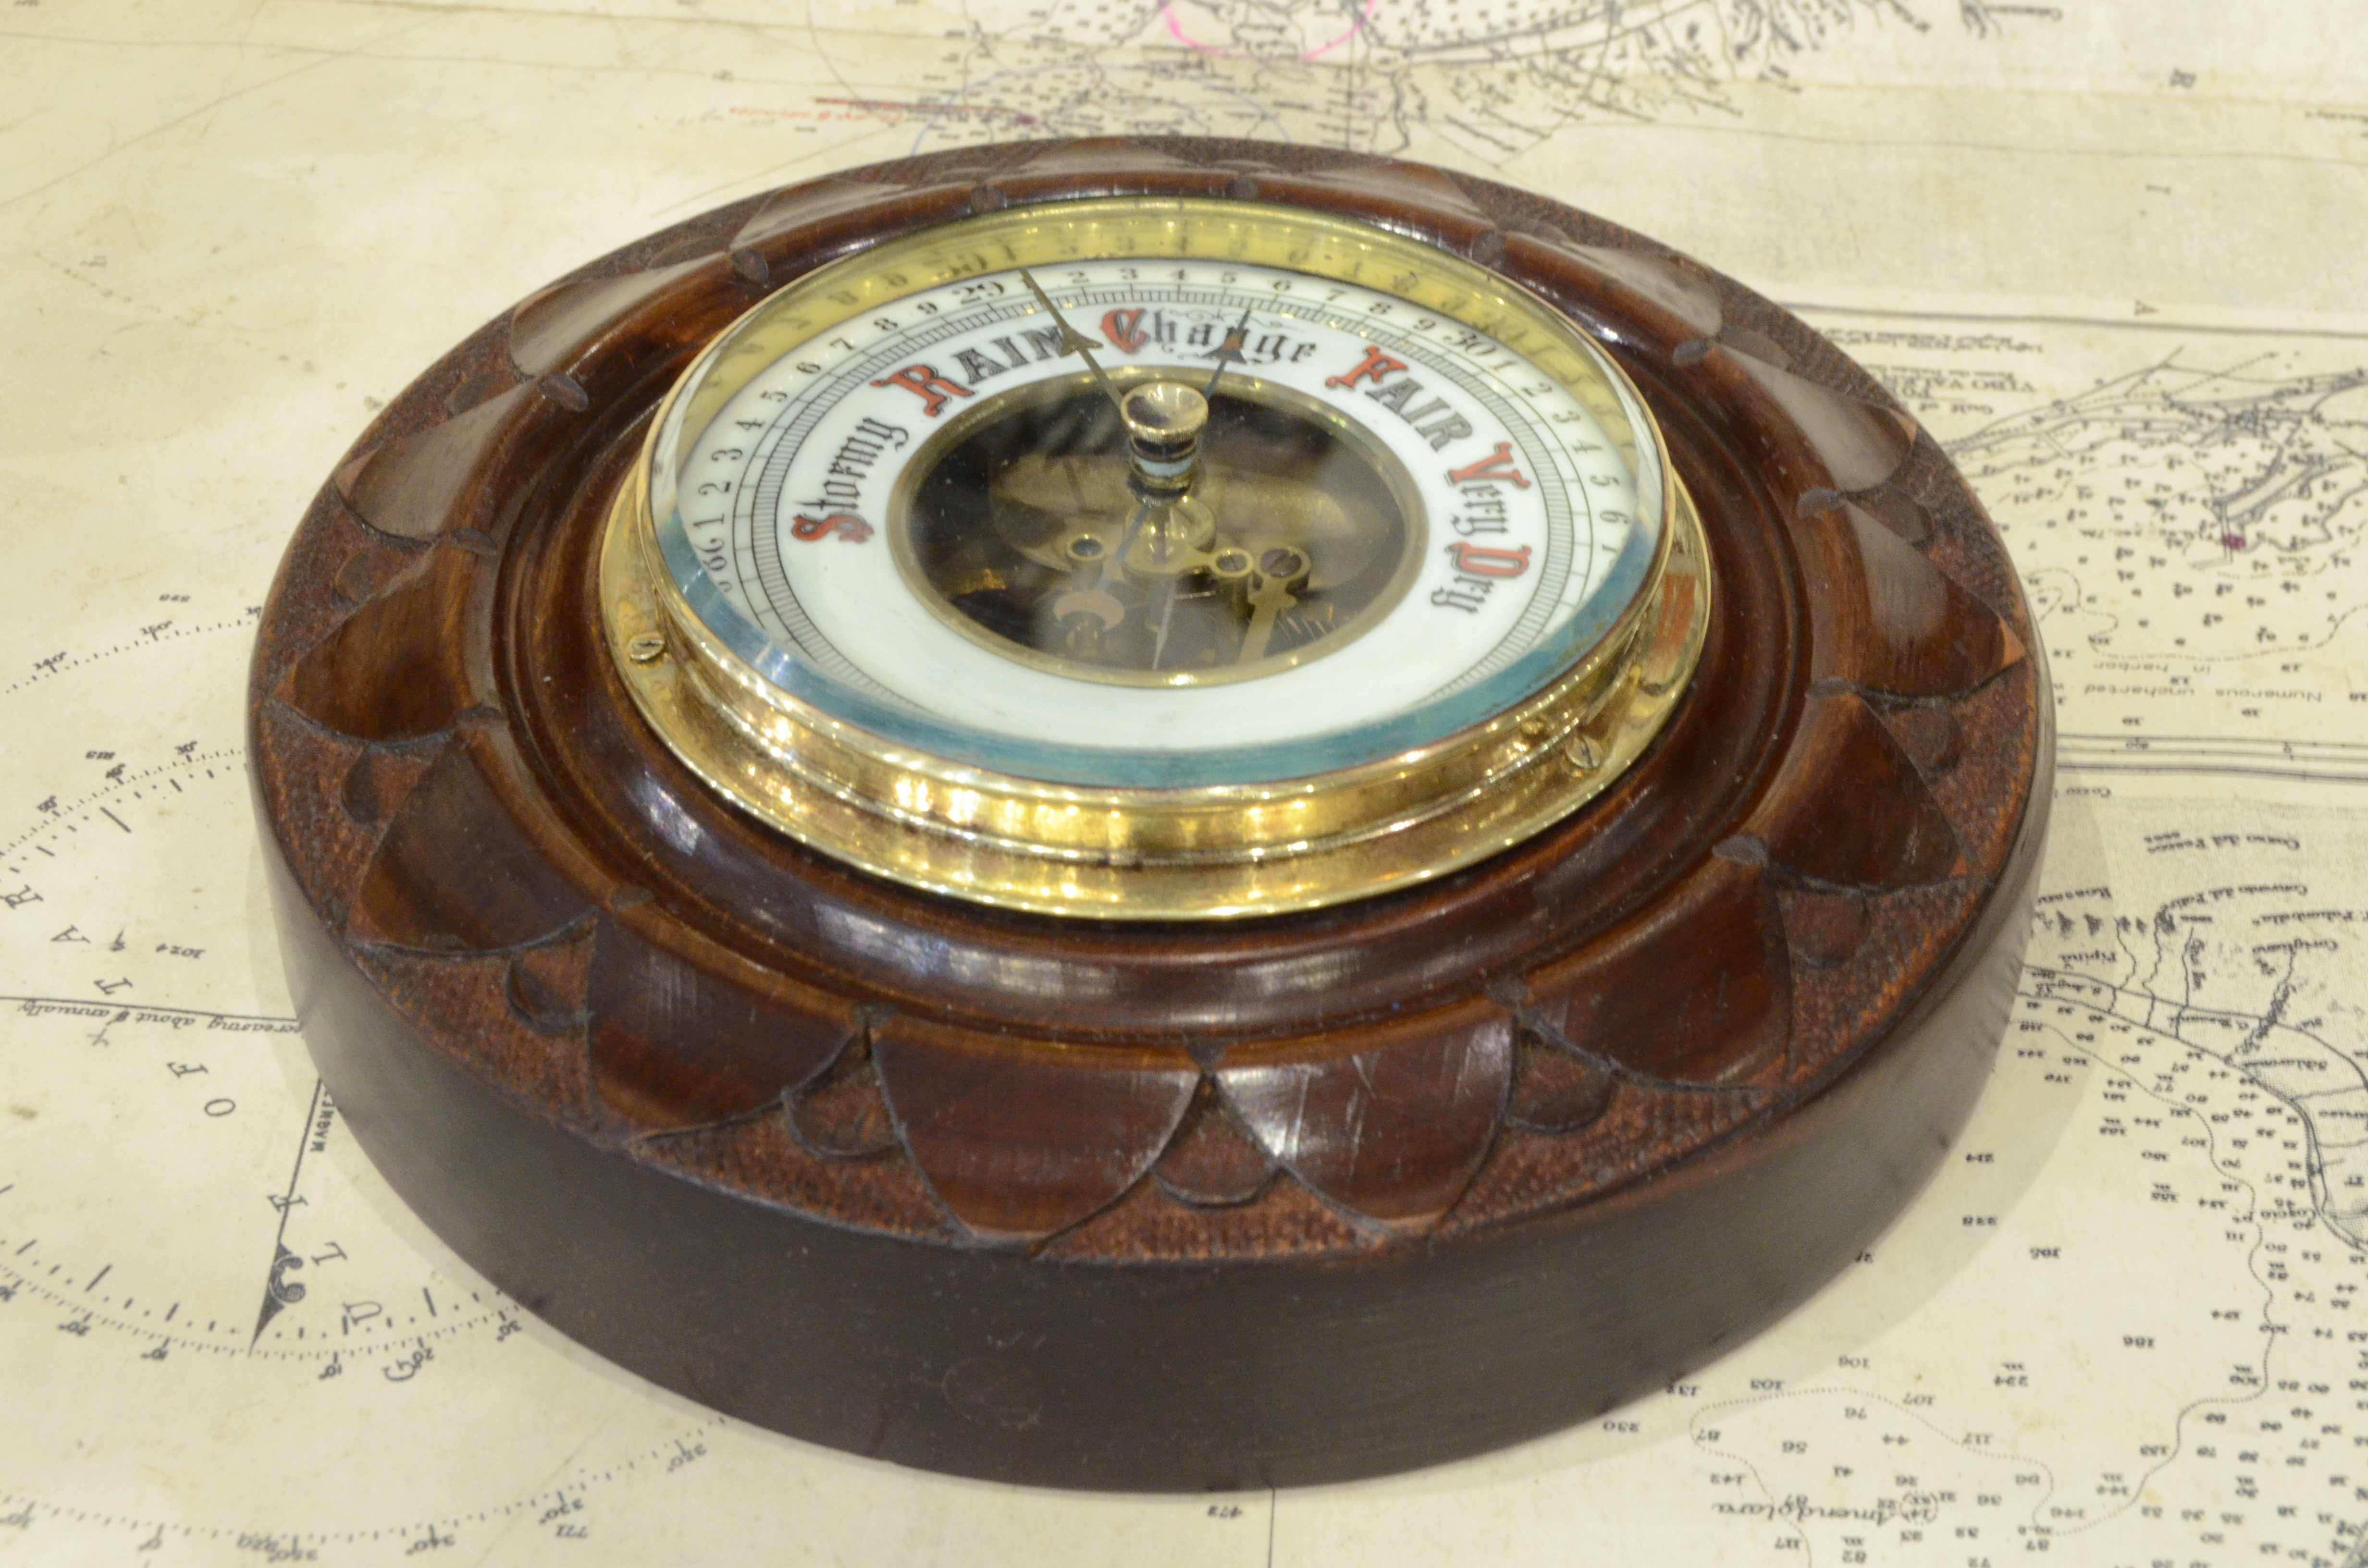 Eaerly 1900s English Carved Woodd Aneroid Barometer Antique Forecast Instrument 5